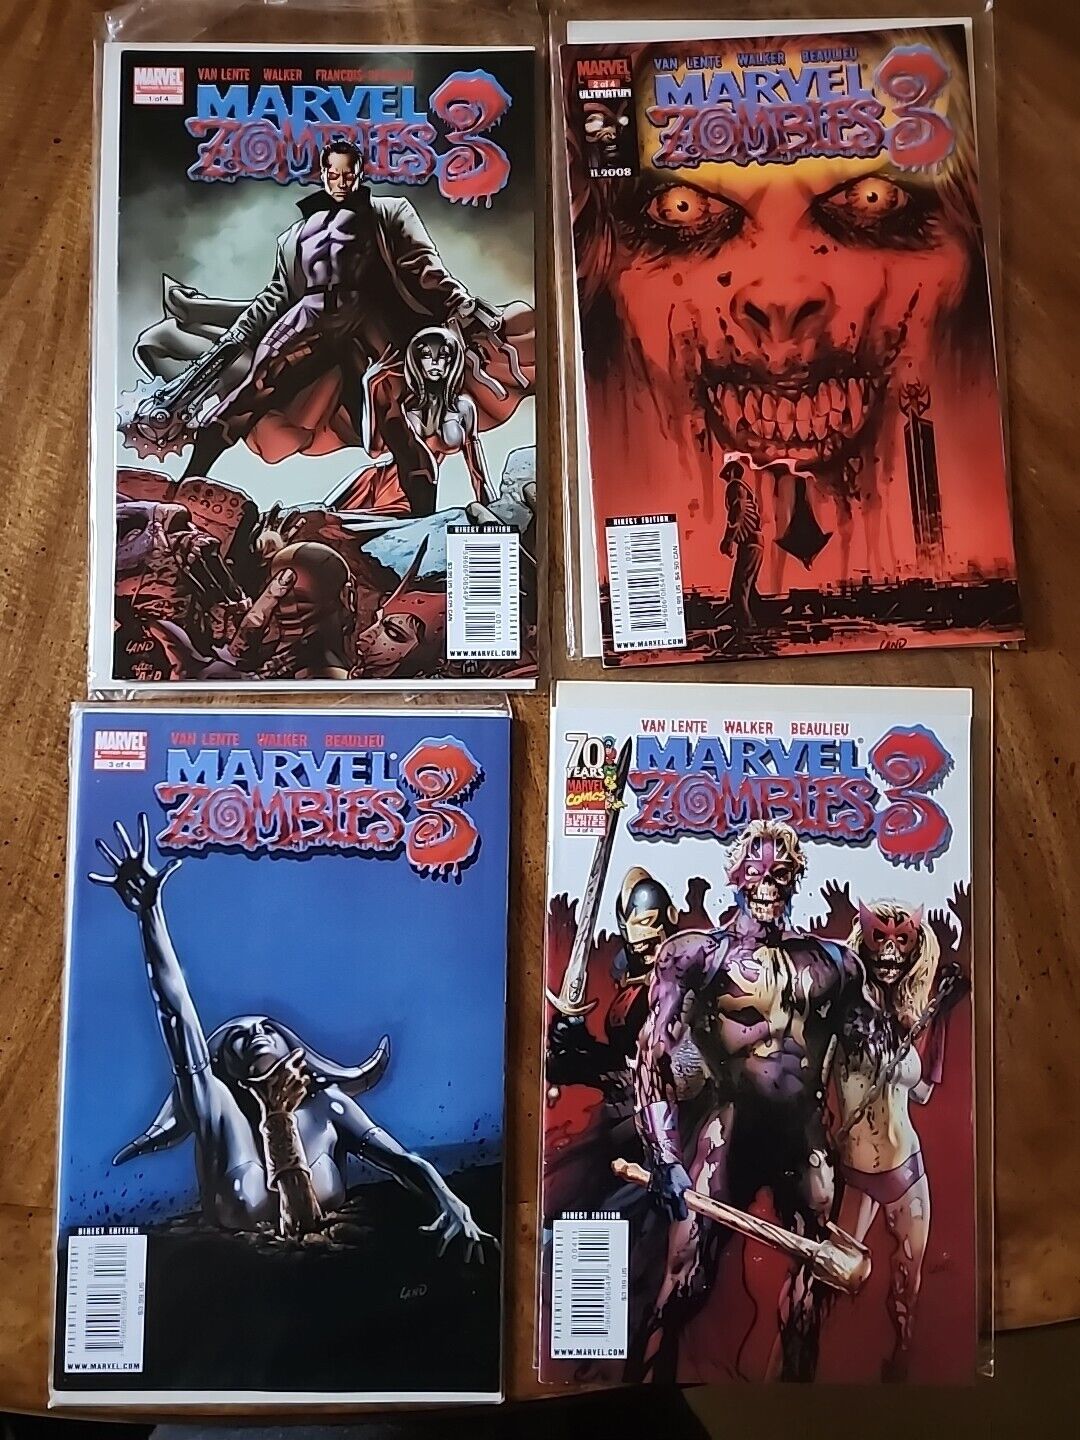 Marvel Zombies 3 # 1-4 (2008, Marvel) Complete Set Greg Land Covers 1 2 3 4